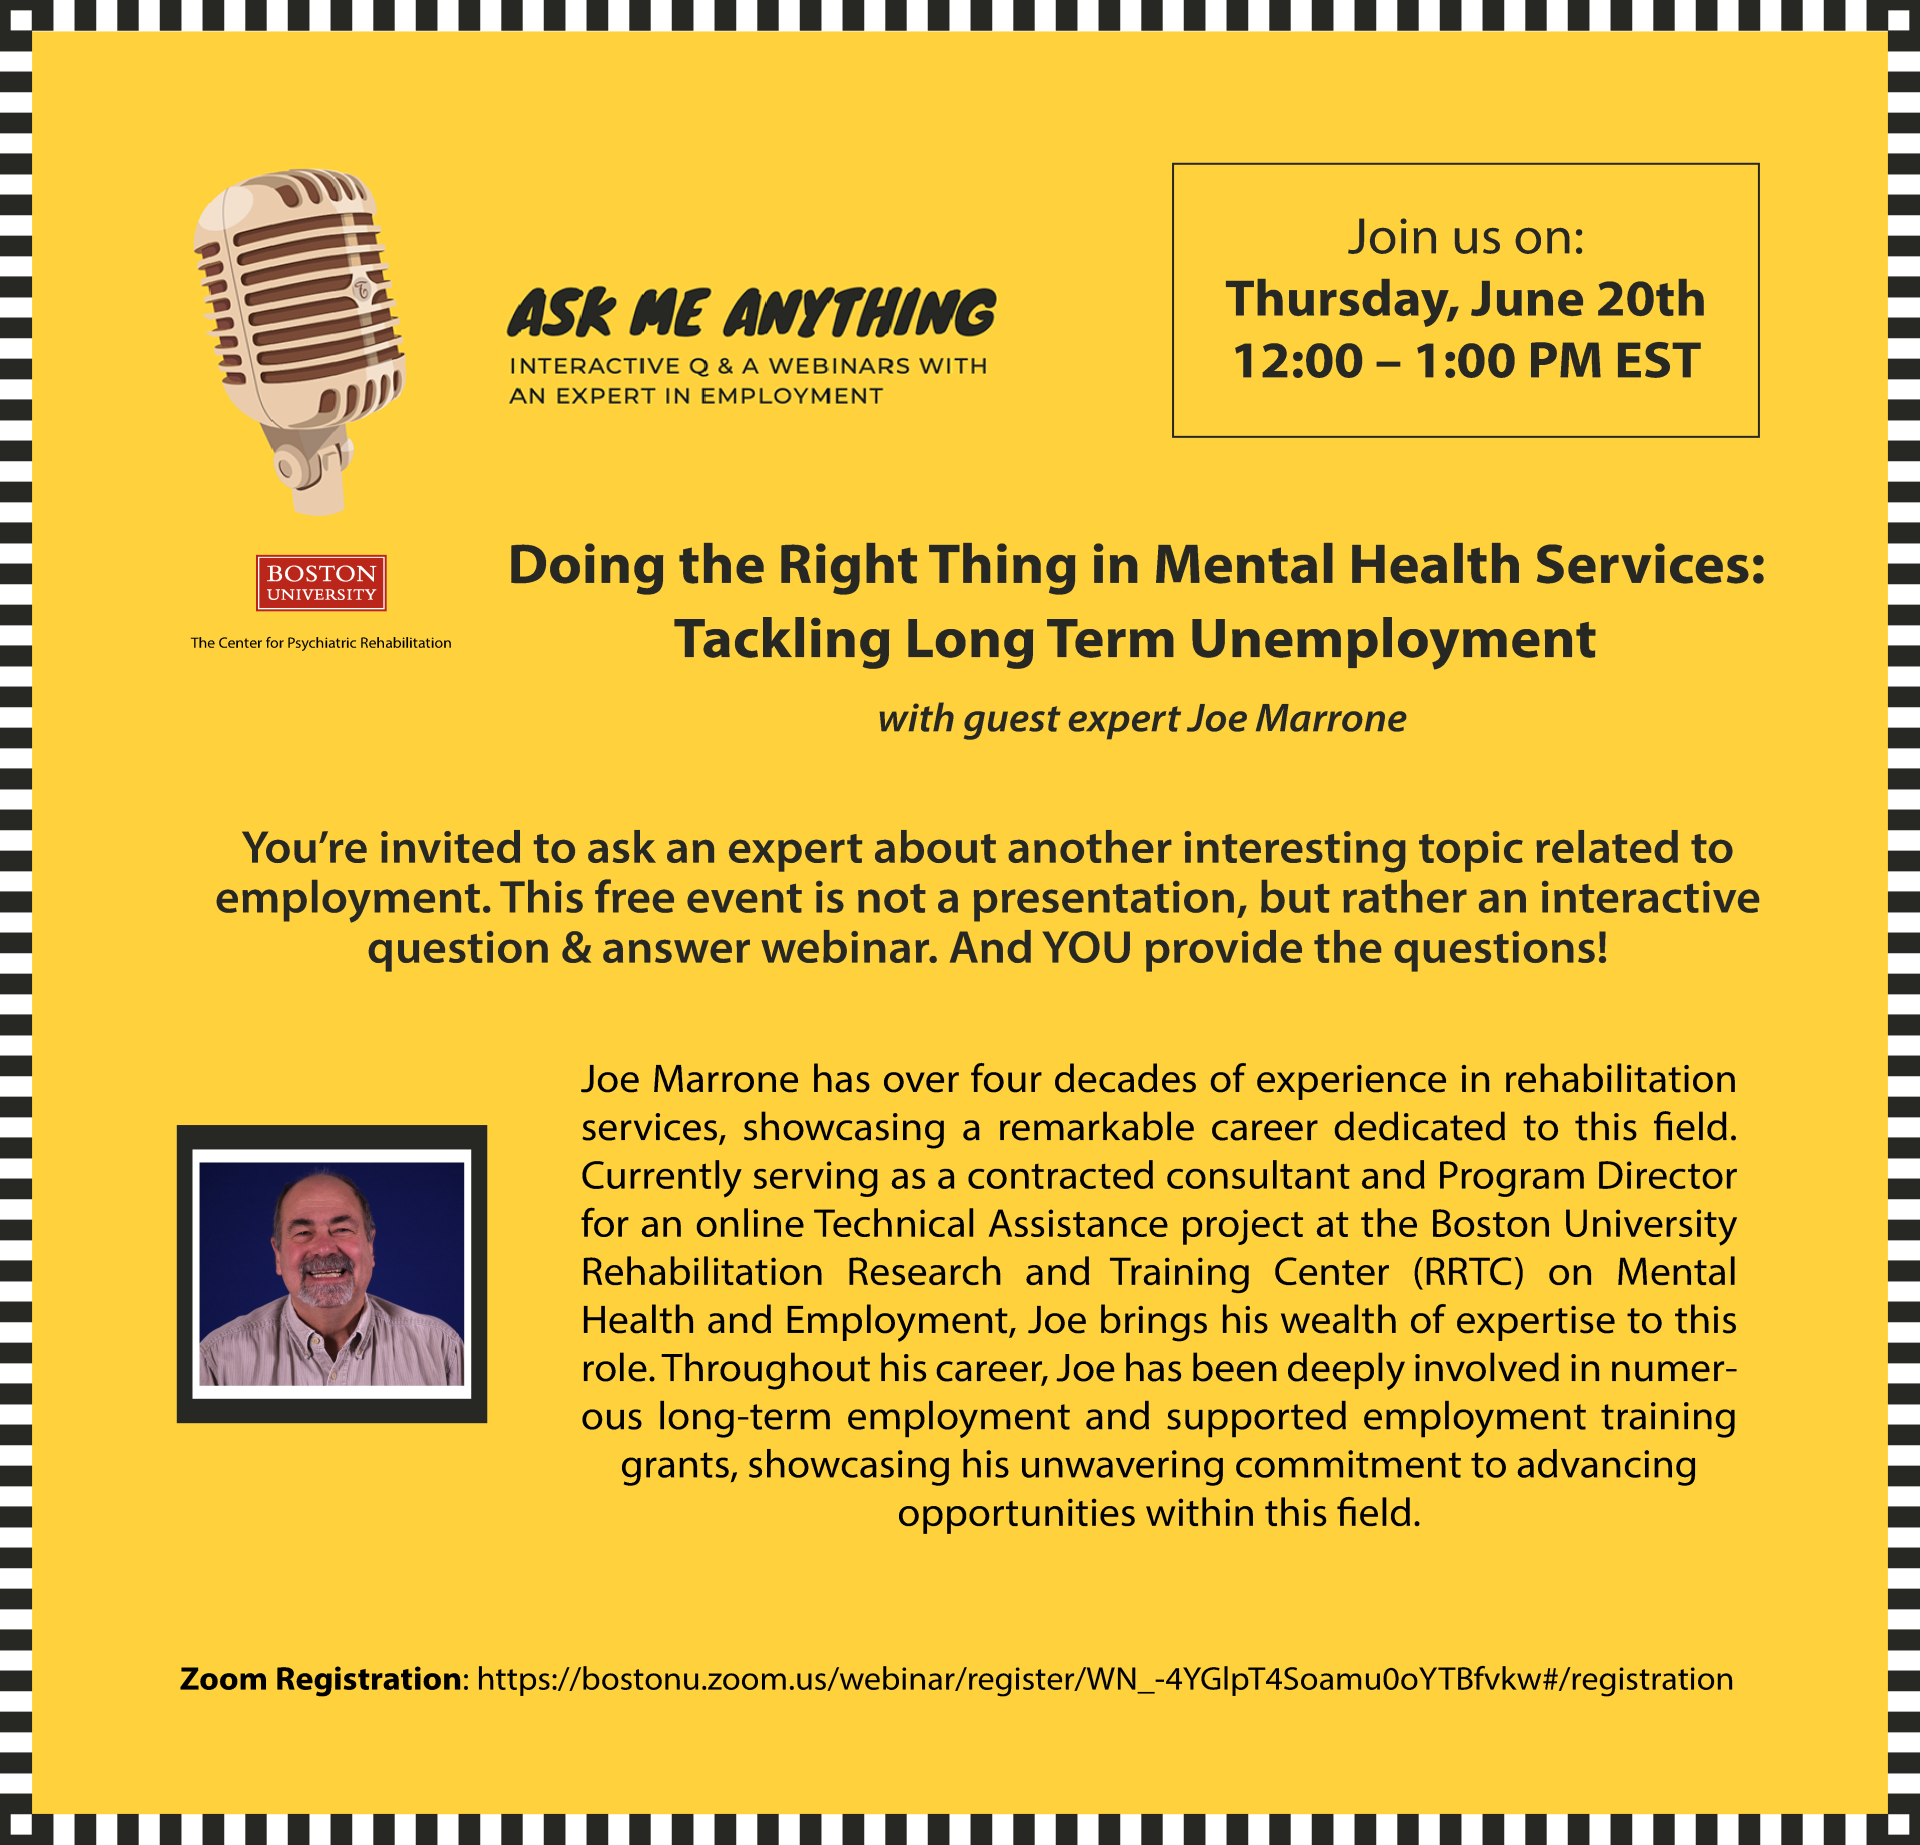 Ask Me Anything about Employment - Doing the Right Thing in Mental Health Services: Tackling Long Term Unemployment with guest expert Joe Marrone You’re invited to ask an expert about another interesting topic related to employment. This free event is not a presentation, but rather an interactive question & answer webinar. And YOU provide the questions! Joe Marrone has over four decades of experience in rehabilitation services, showcasing a remarkable career dedicated to this field. Currently serving as a contracted consultant and Program Director for an online Technical Assistance project at the Boston University Rehabilitation Research and Training Center (RRTC) on Mental Health and Employment, Joe brings his wealth of expertise to this role. Throughout his career, Joe has been deeply involved in numerous long-term employment and supported employment training grants, showcasing his unwavering commitment to advancing opportunities within this field. Submit webinar questions before the webinar to: Lisa Krystynak at lisakaye@bu.edu Boston University provides reasonable accommodation upon request. Please send an email to lisakaye@bu.edu at least 14 days prior to the event with the specific accommodations you require. If less than 14 days remain until the event, please submit your request the same day you register, or as soon as possible, so we can make every effort to accommodate you.